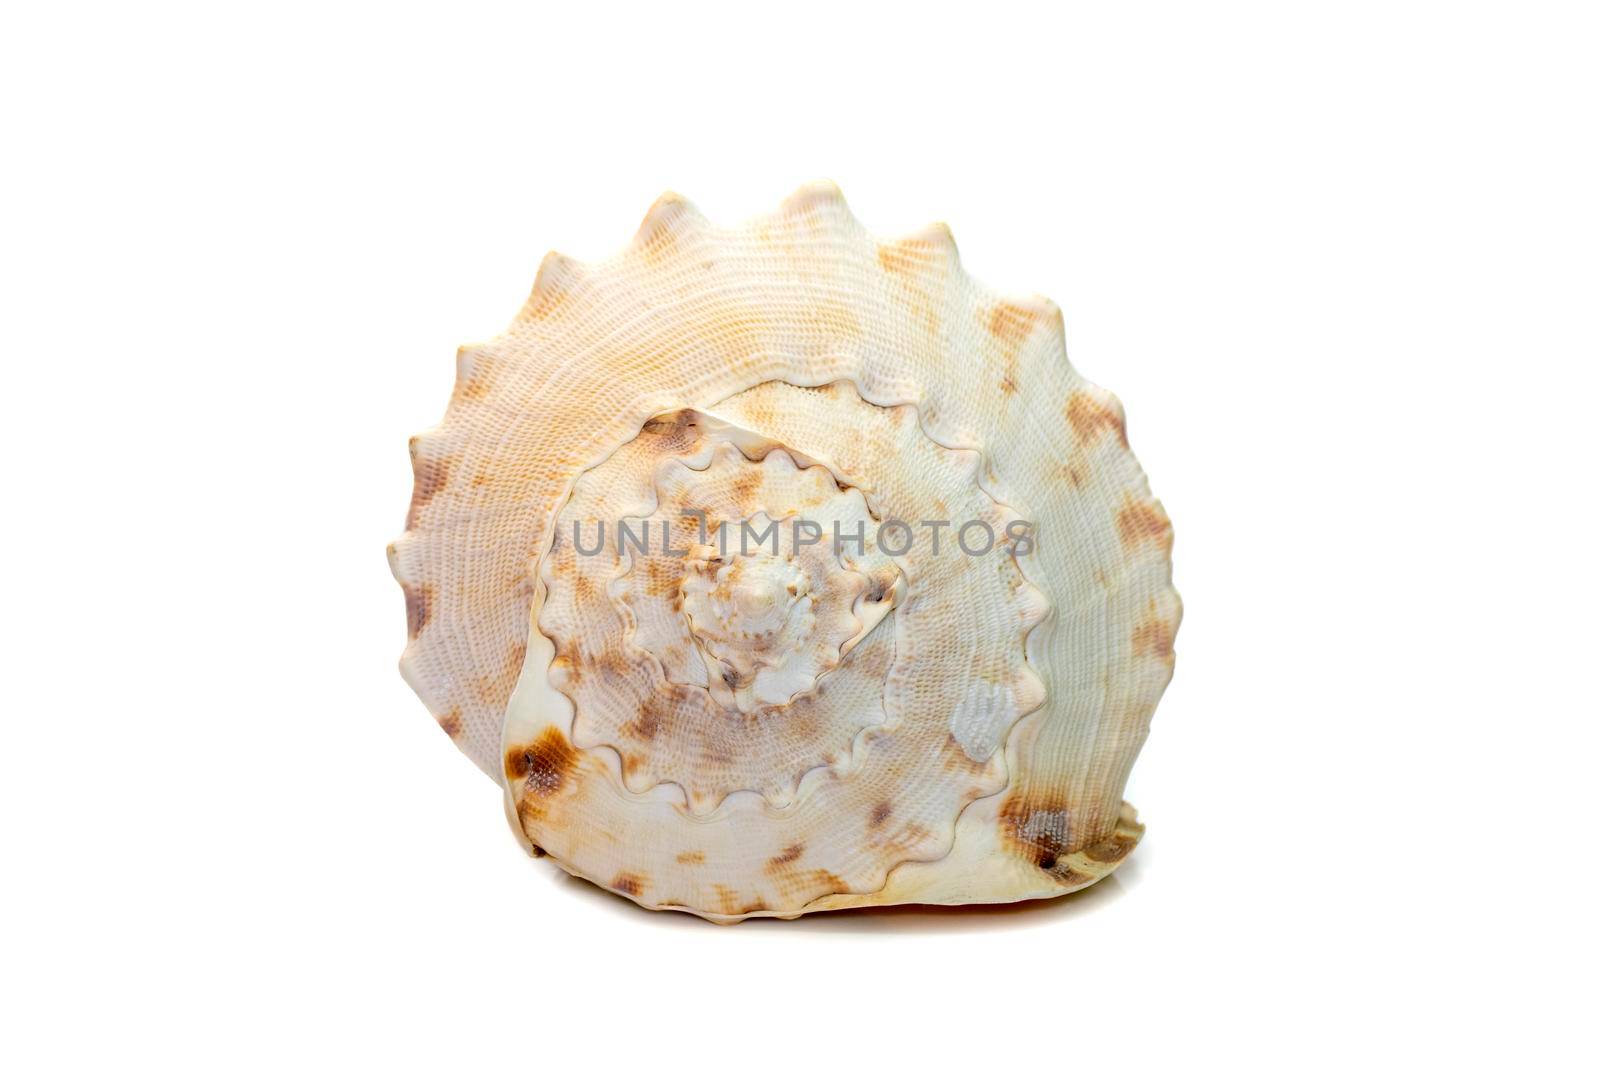 Image of Horned Helmet sea shells. (cassis Cornuta) is a species of extremely large sea snail isolated on white background. Undersea Animals. Sea Shells.